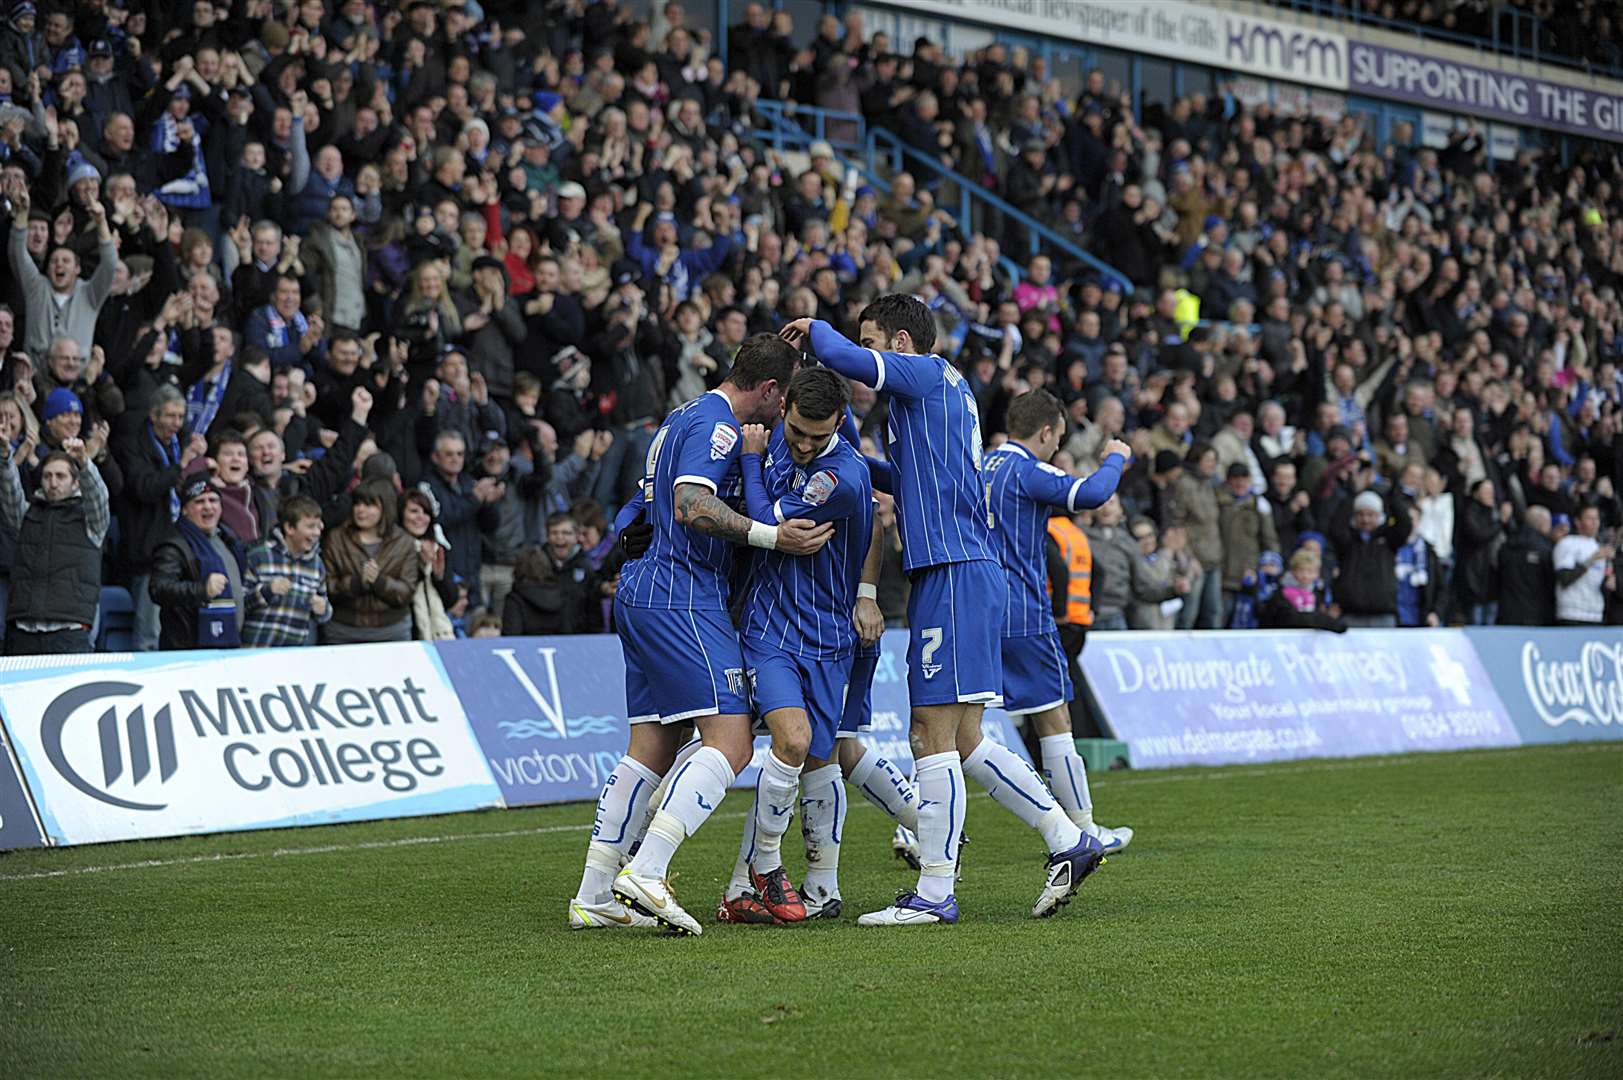 Gillingham celebrate a goal against Stoke City in their third round FA Cup match in 2012 Picture: Barry Goodwin